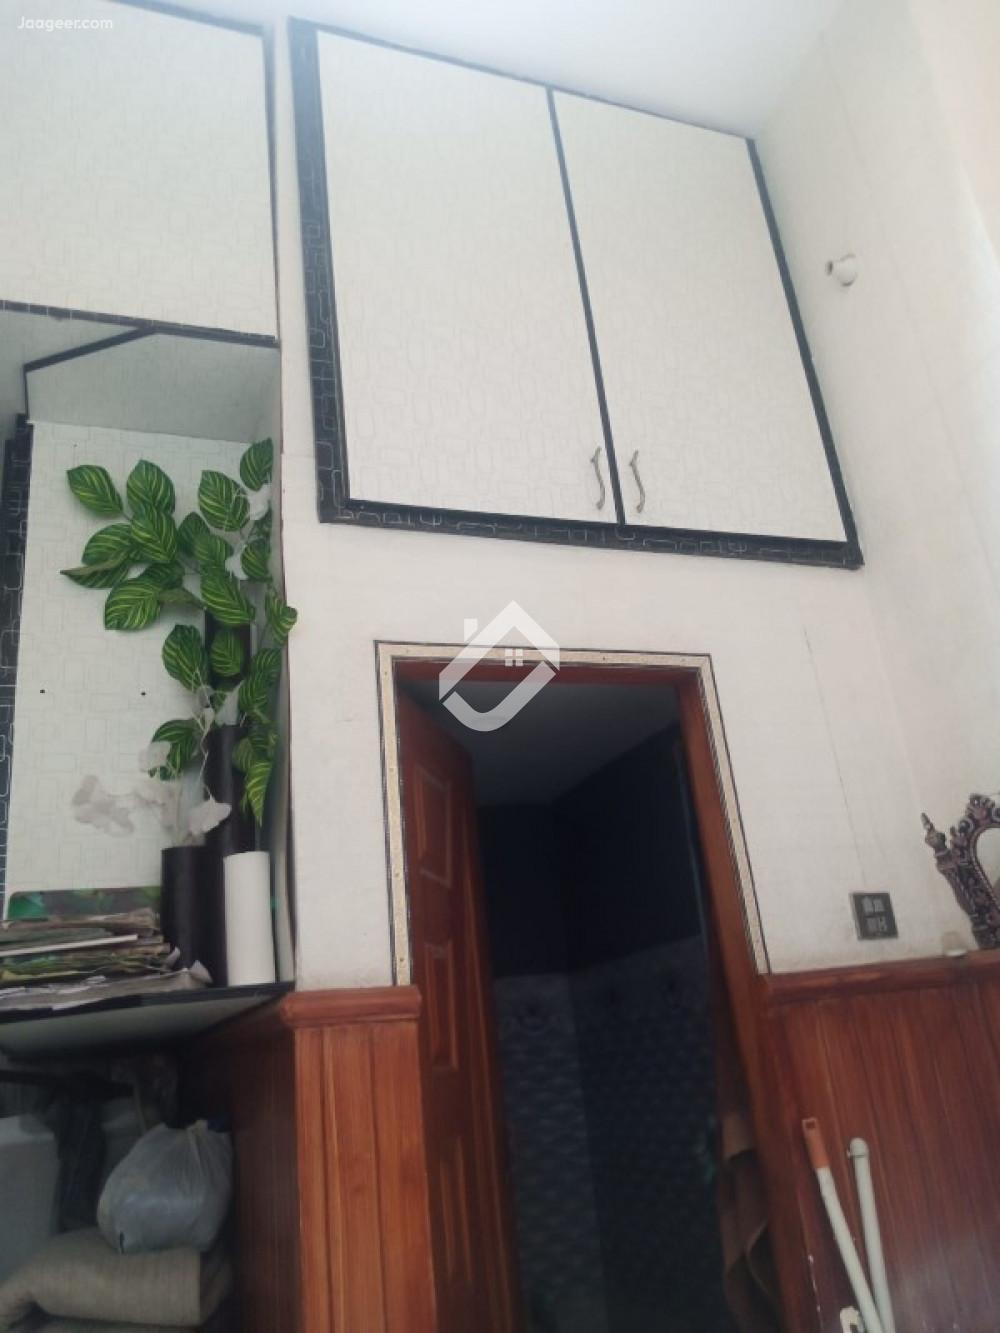 View  2.5 Marla House For Sale In Zafar Colony Bhalwal Road  in Zafar Colony, Sargodha